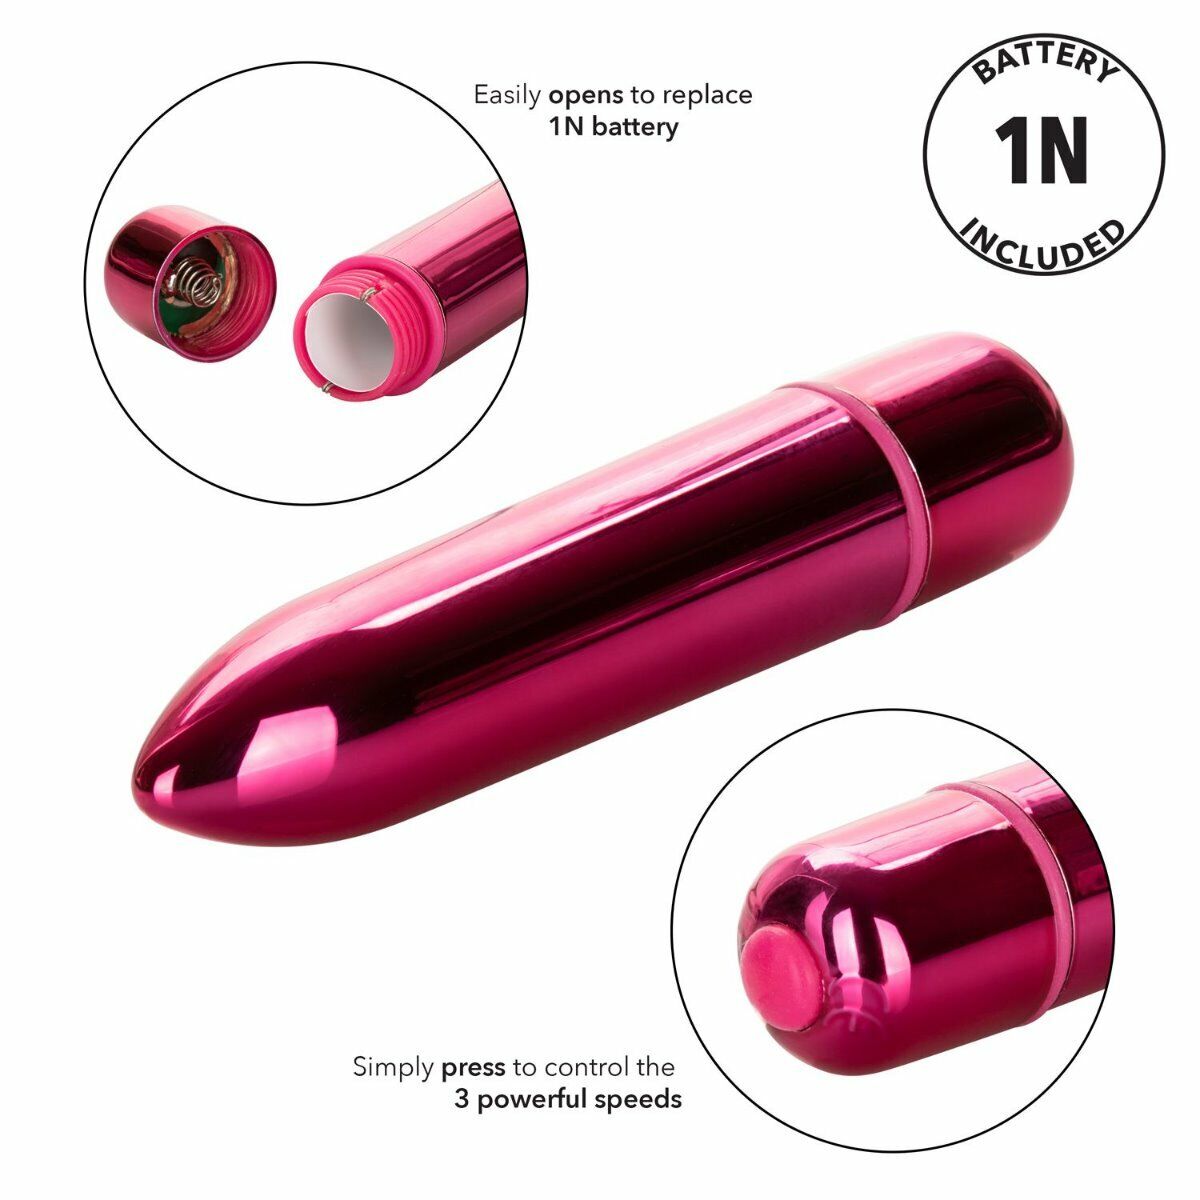 High Intensity Powerful Discreet Wireless Bullet Clitoral Anal Sex Vibe Vibrator